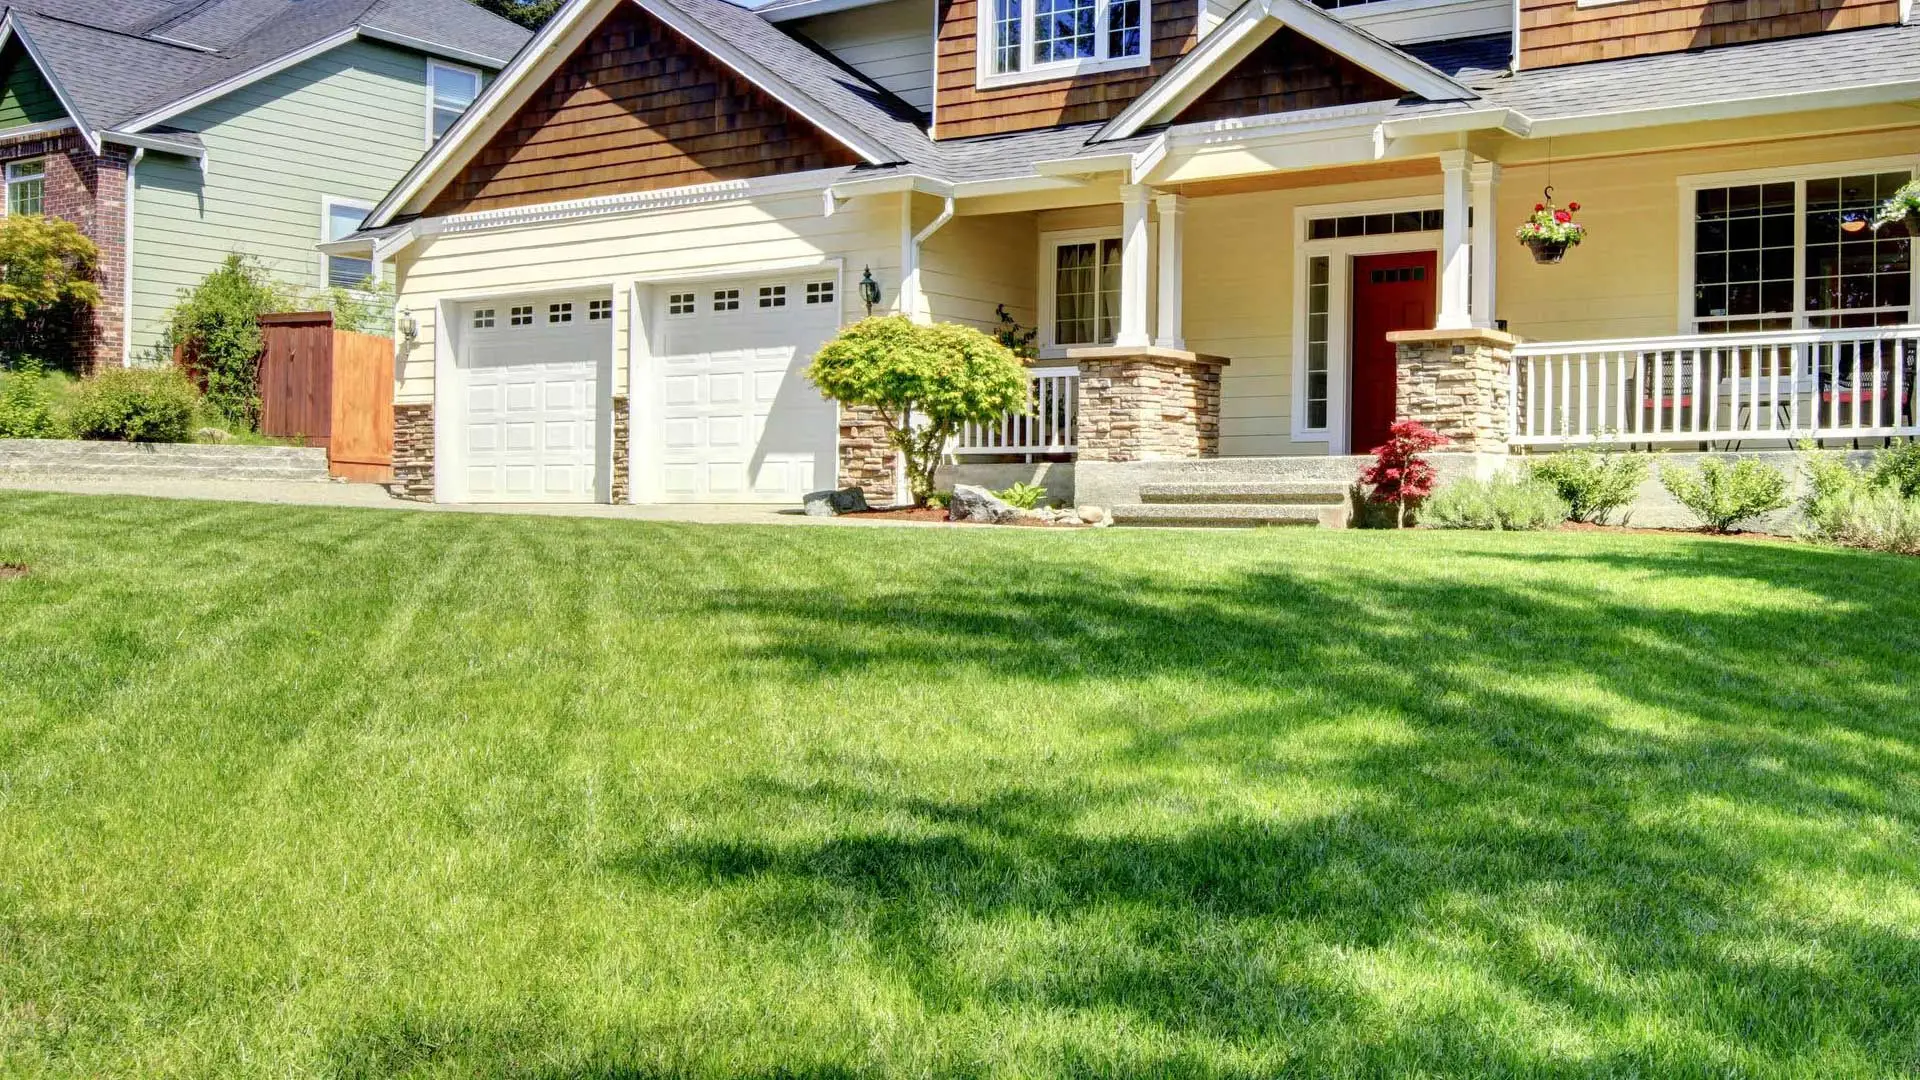 Home in Gresham, OR serviced by J&C Lawn Care.